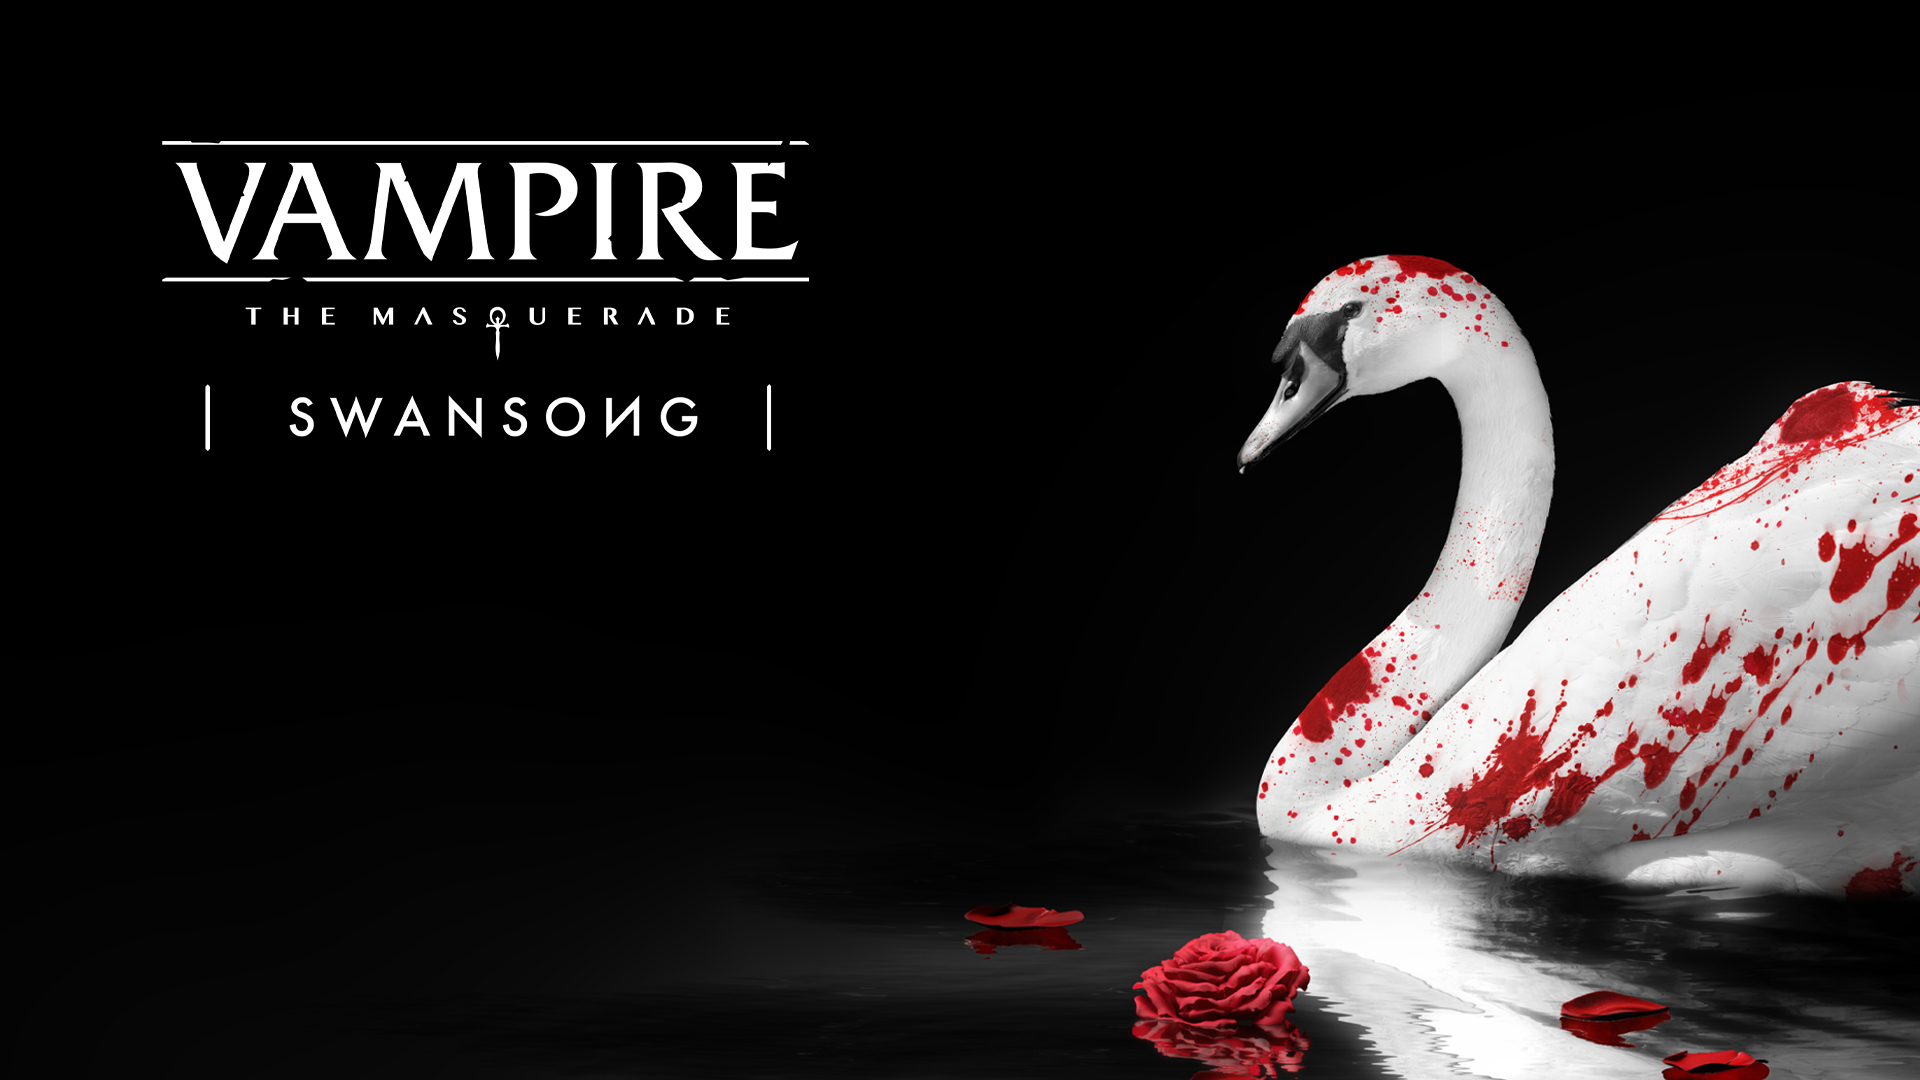 Vampire: The Masquerade – Swansong releases for the Nintendo Switch in Europe